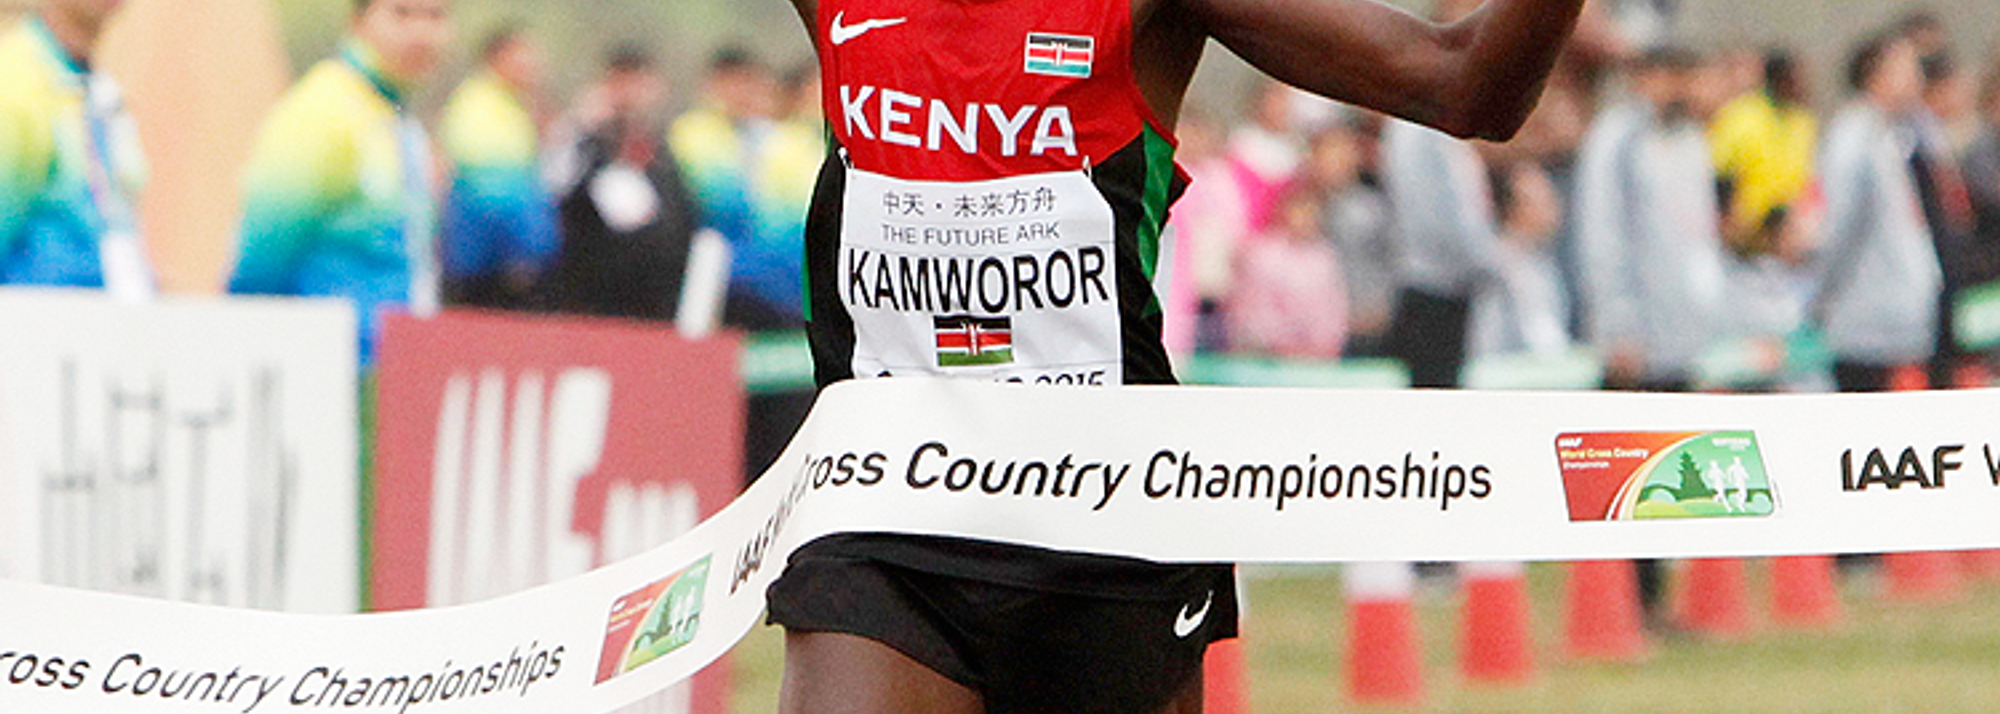 Geoffrey Kamworor enhanced his reputation as a runner for the big stage as he maintained his unbeaten championship record at the IAAF World Cross Country Championships, Guiyang 2015.